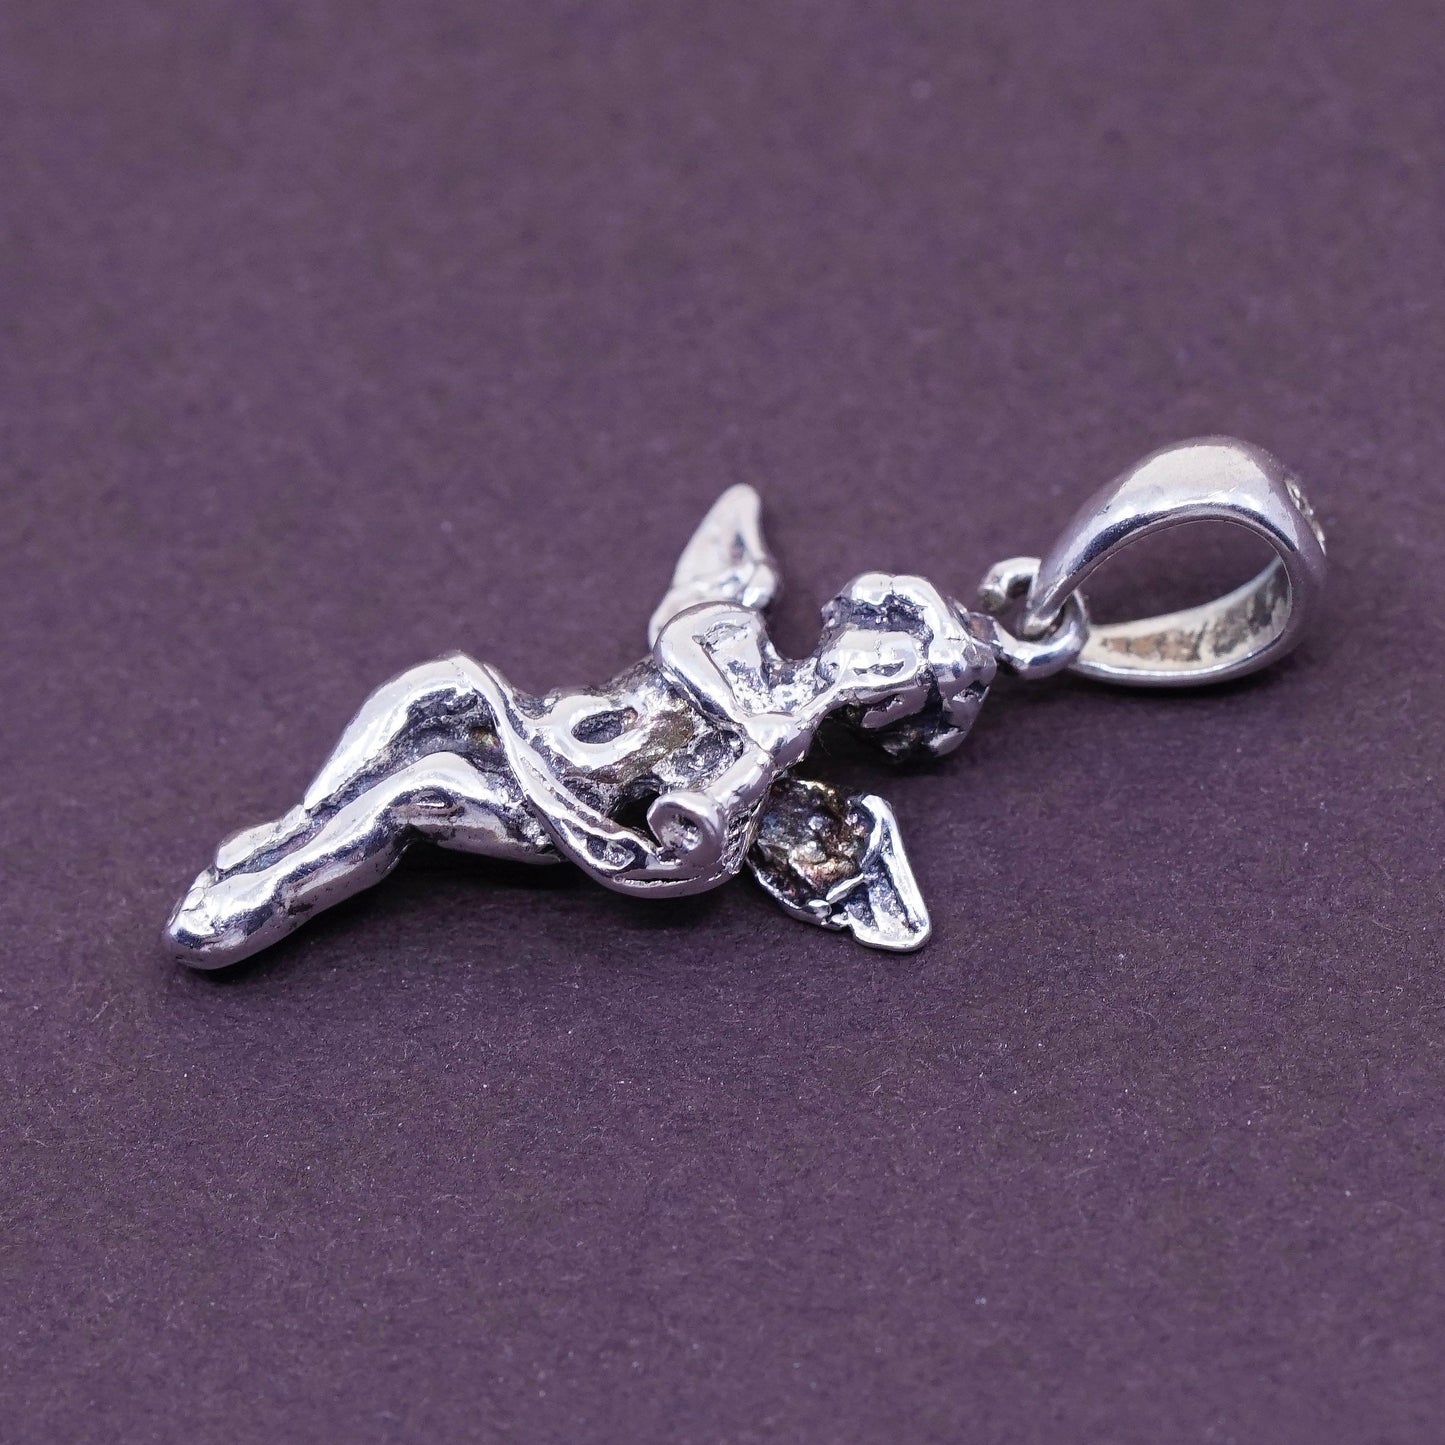 Vintage Sterling silver handmade pendant, Italy 925 angel with trumpet charm